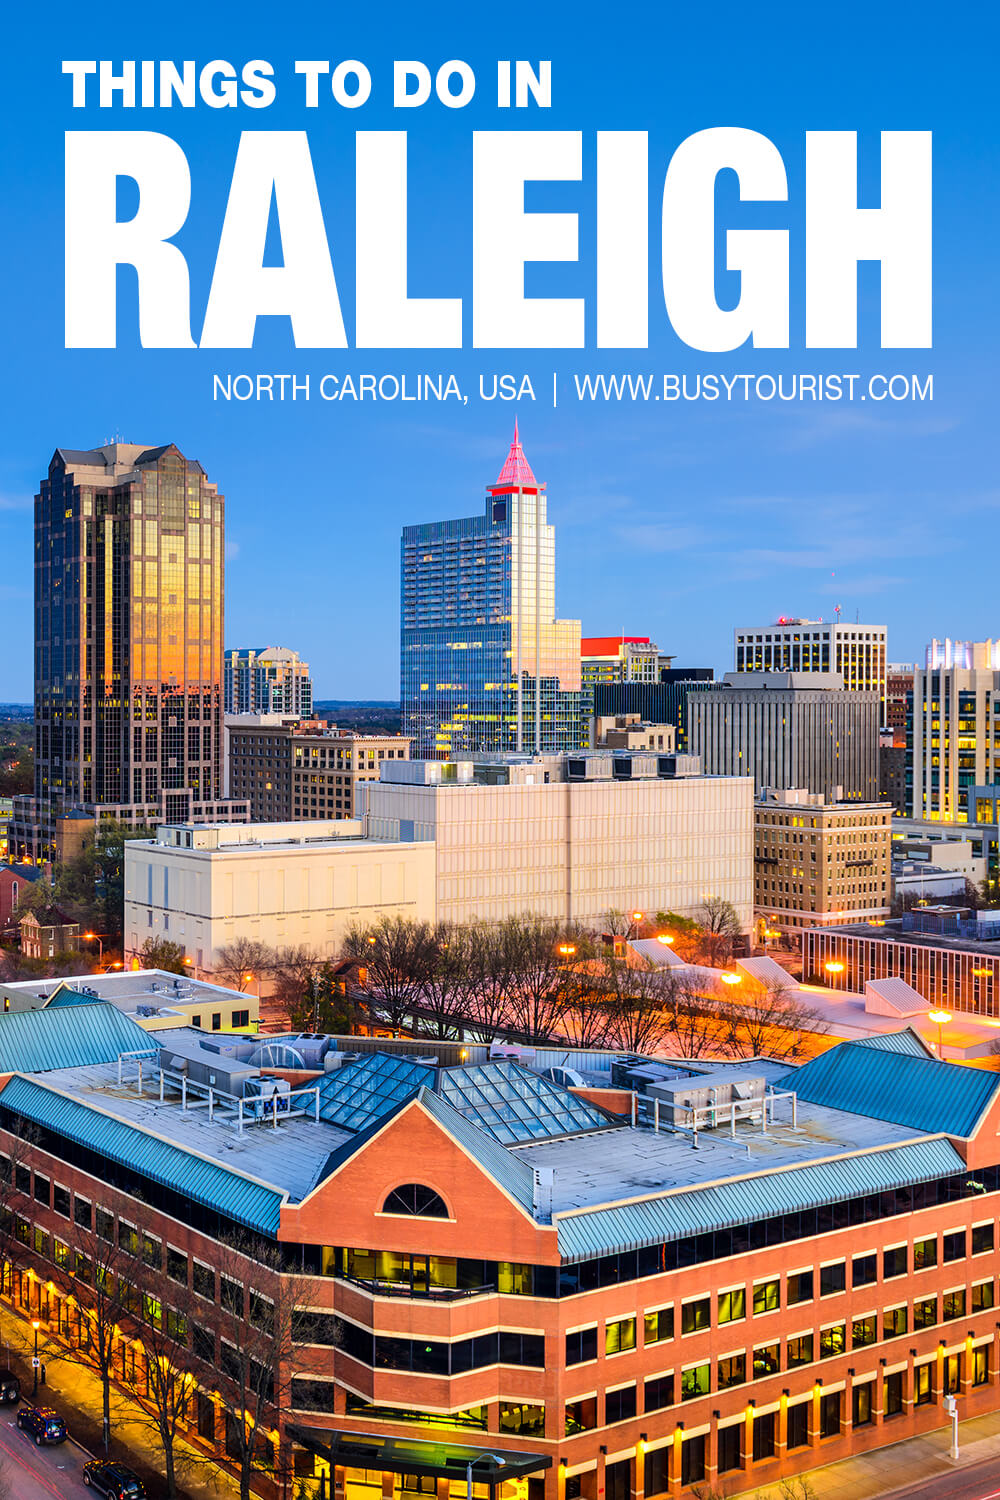 27 Best & Fun Things To Do In Raleigh (NC) Attractions & Activities